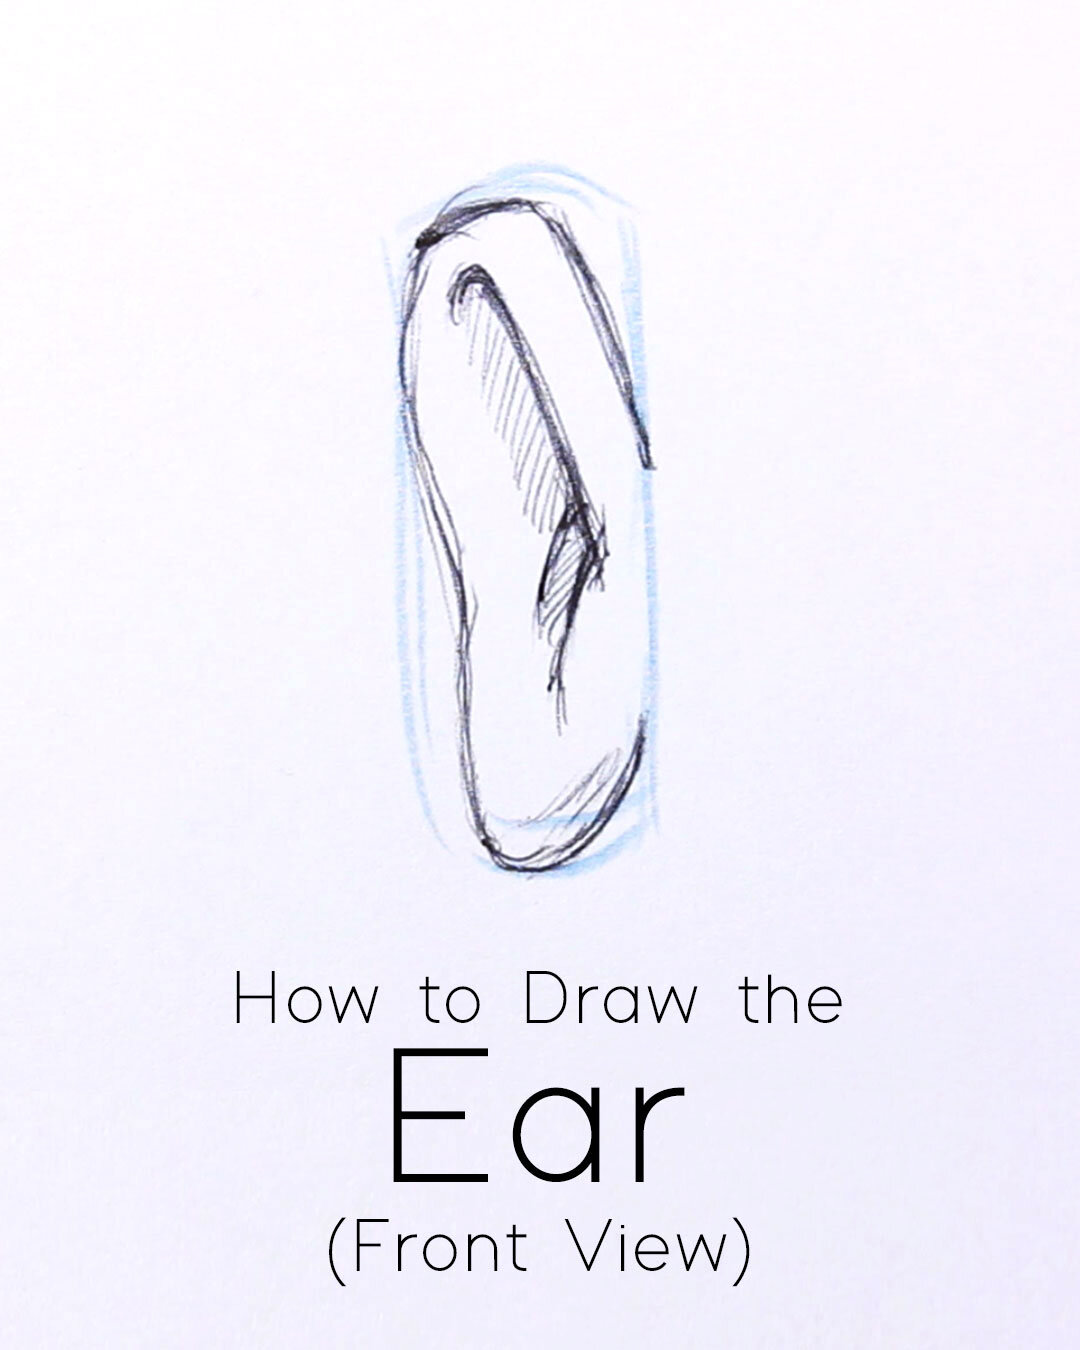 How to Draw the Ear from Front View